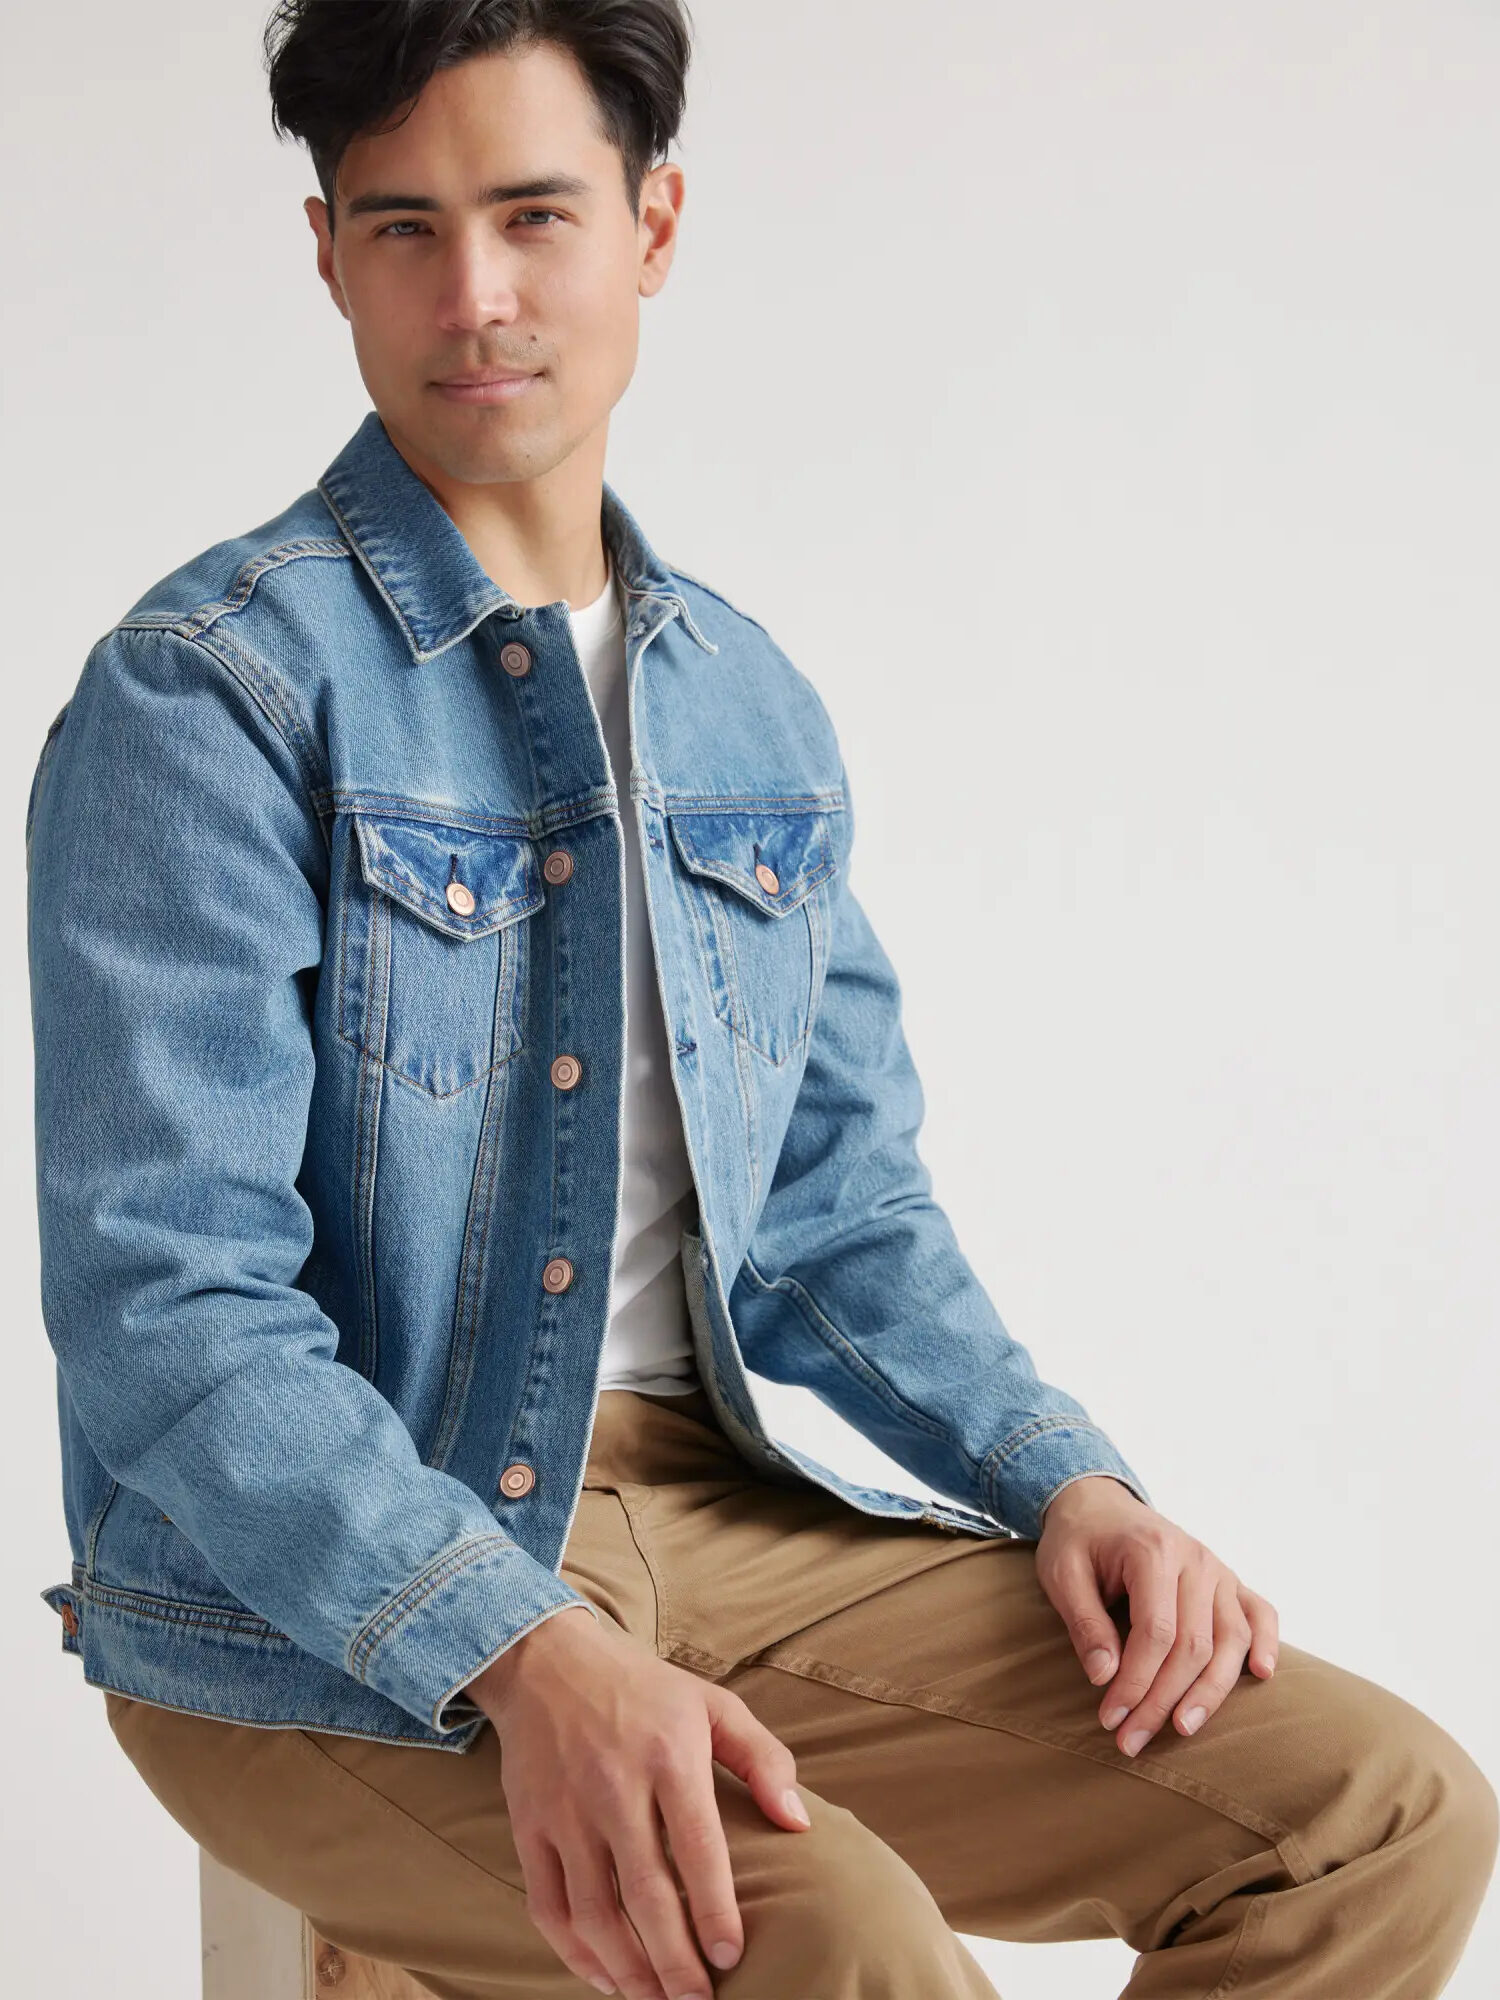 Model wearing a Quince Organic Cotton Denim Jacket while seated on a chair